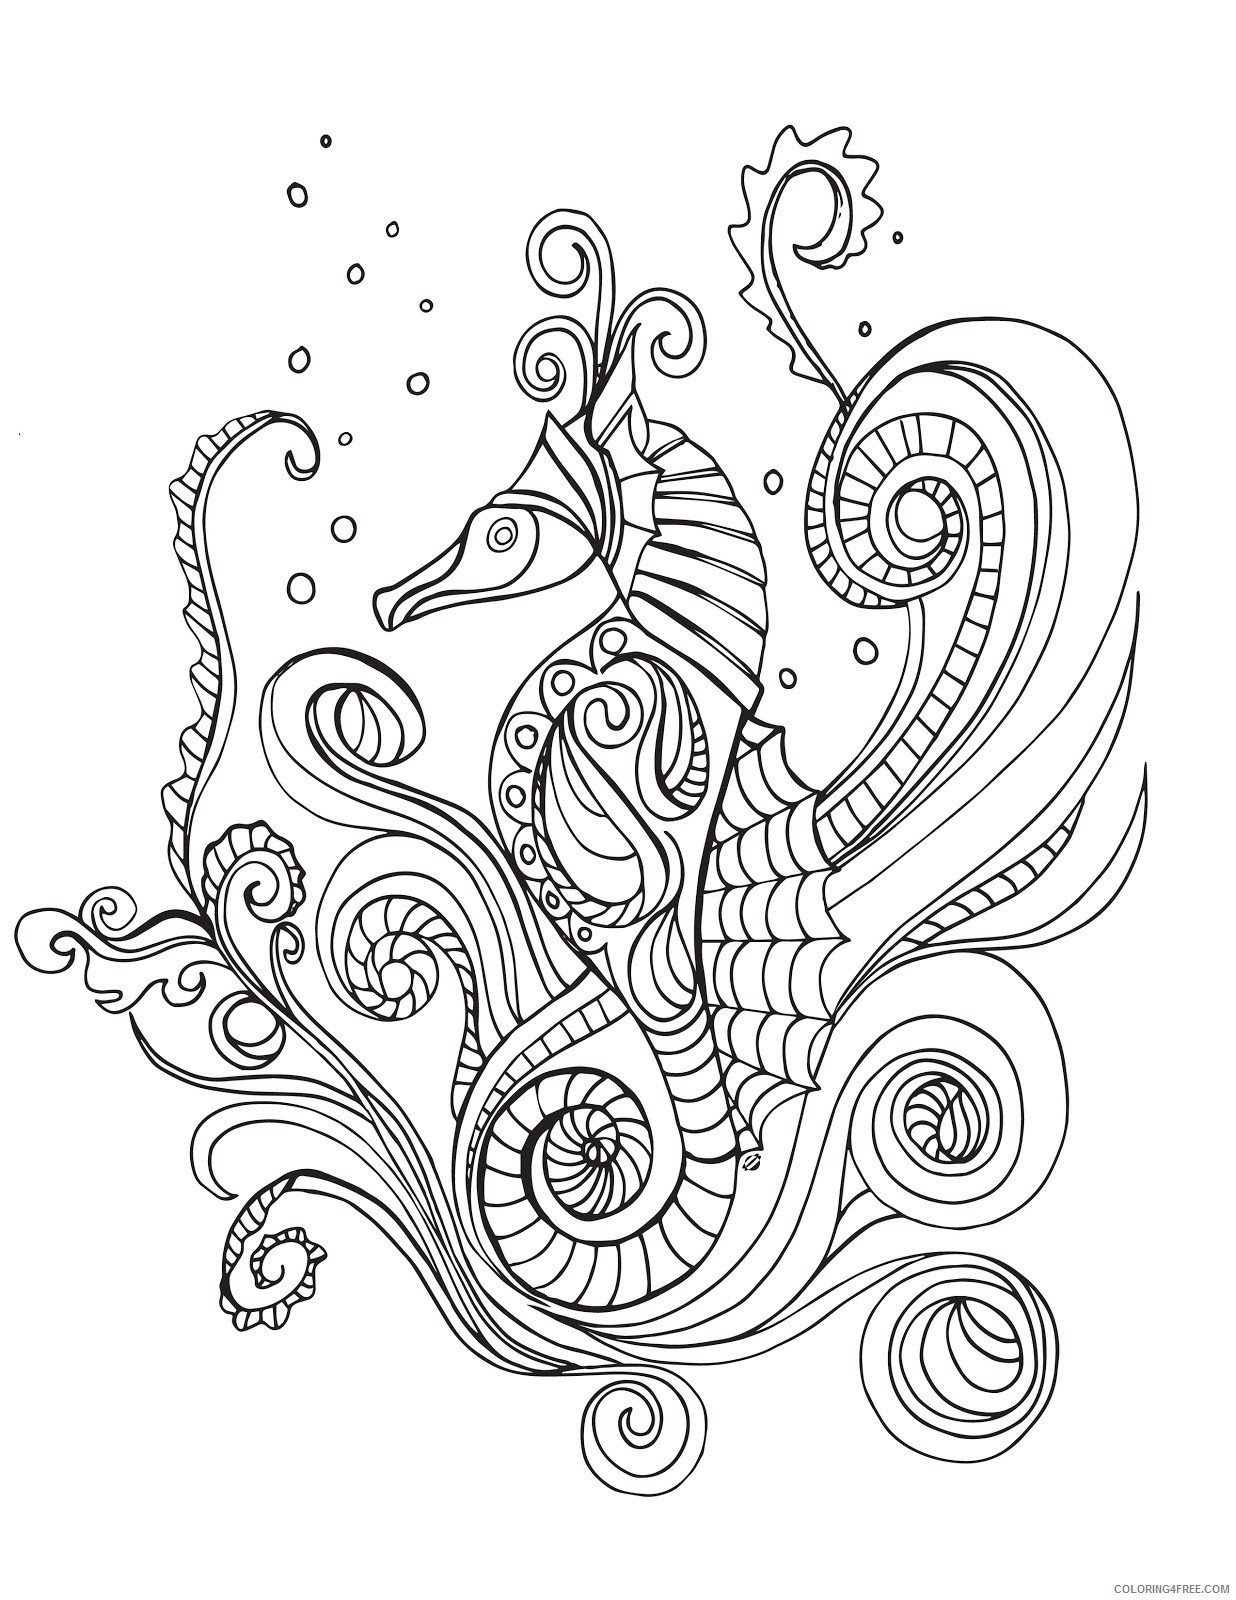 grown up coloring pages seahorse Coloring4free